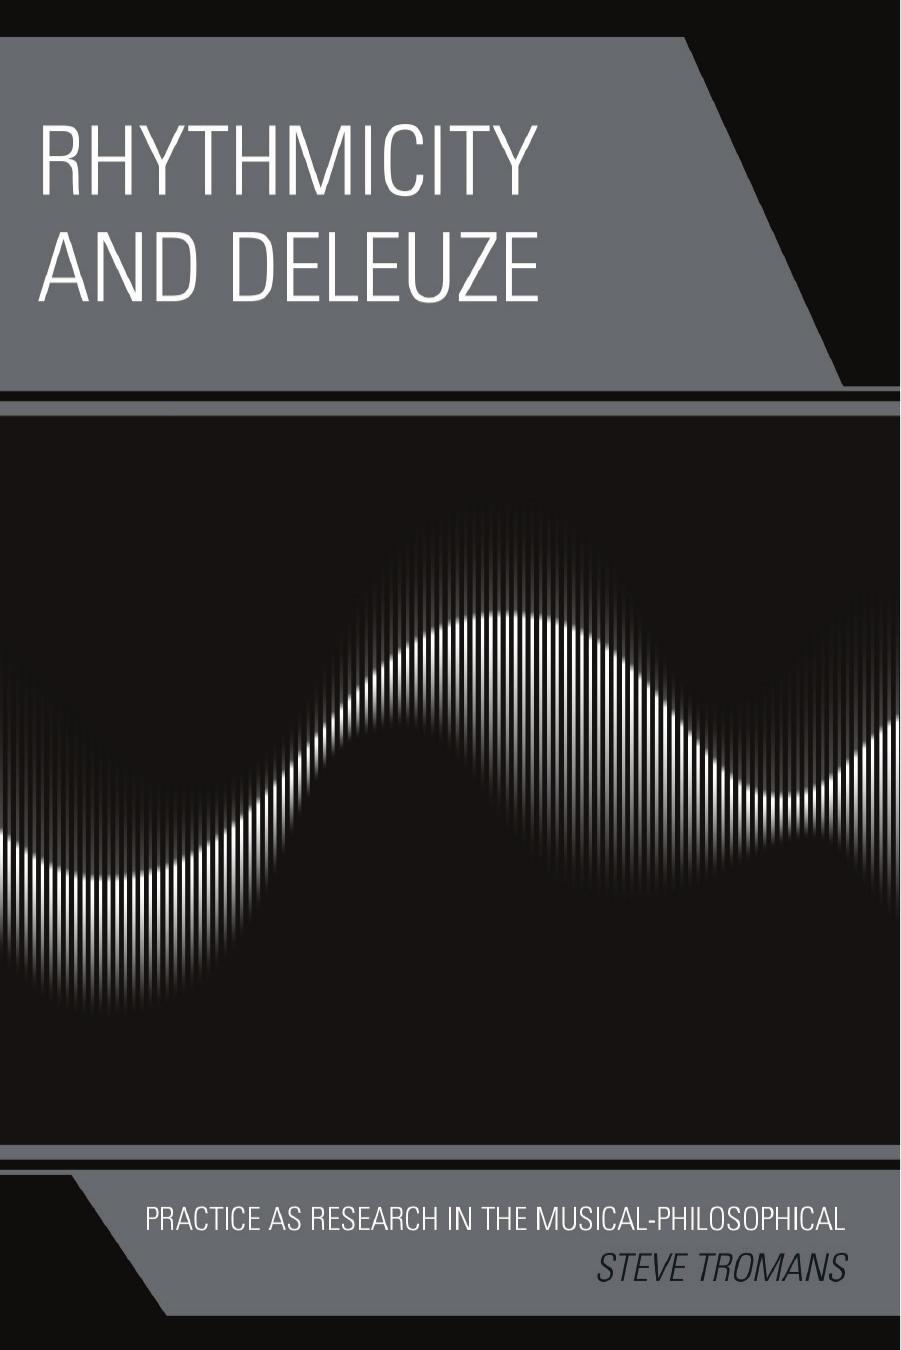 Rhythmicity and Deleuze: Practice as Research in the Musical-Philosophical by Steve Tromans